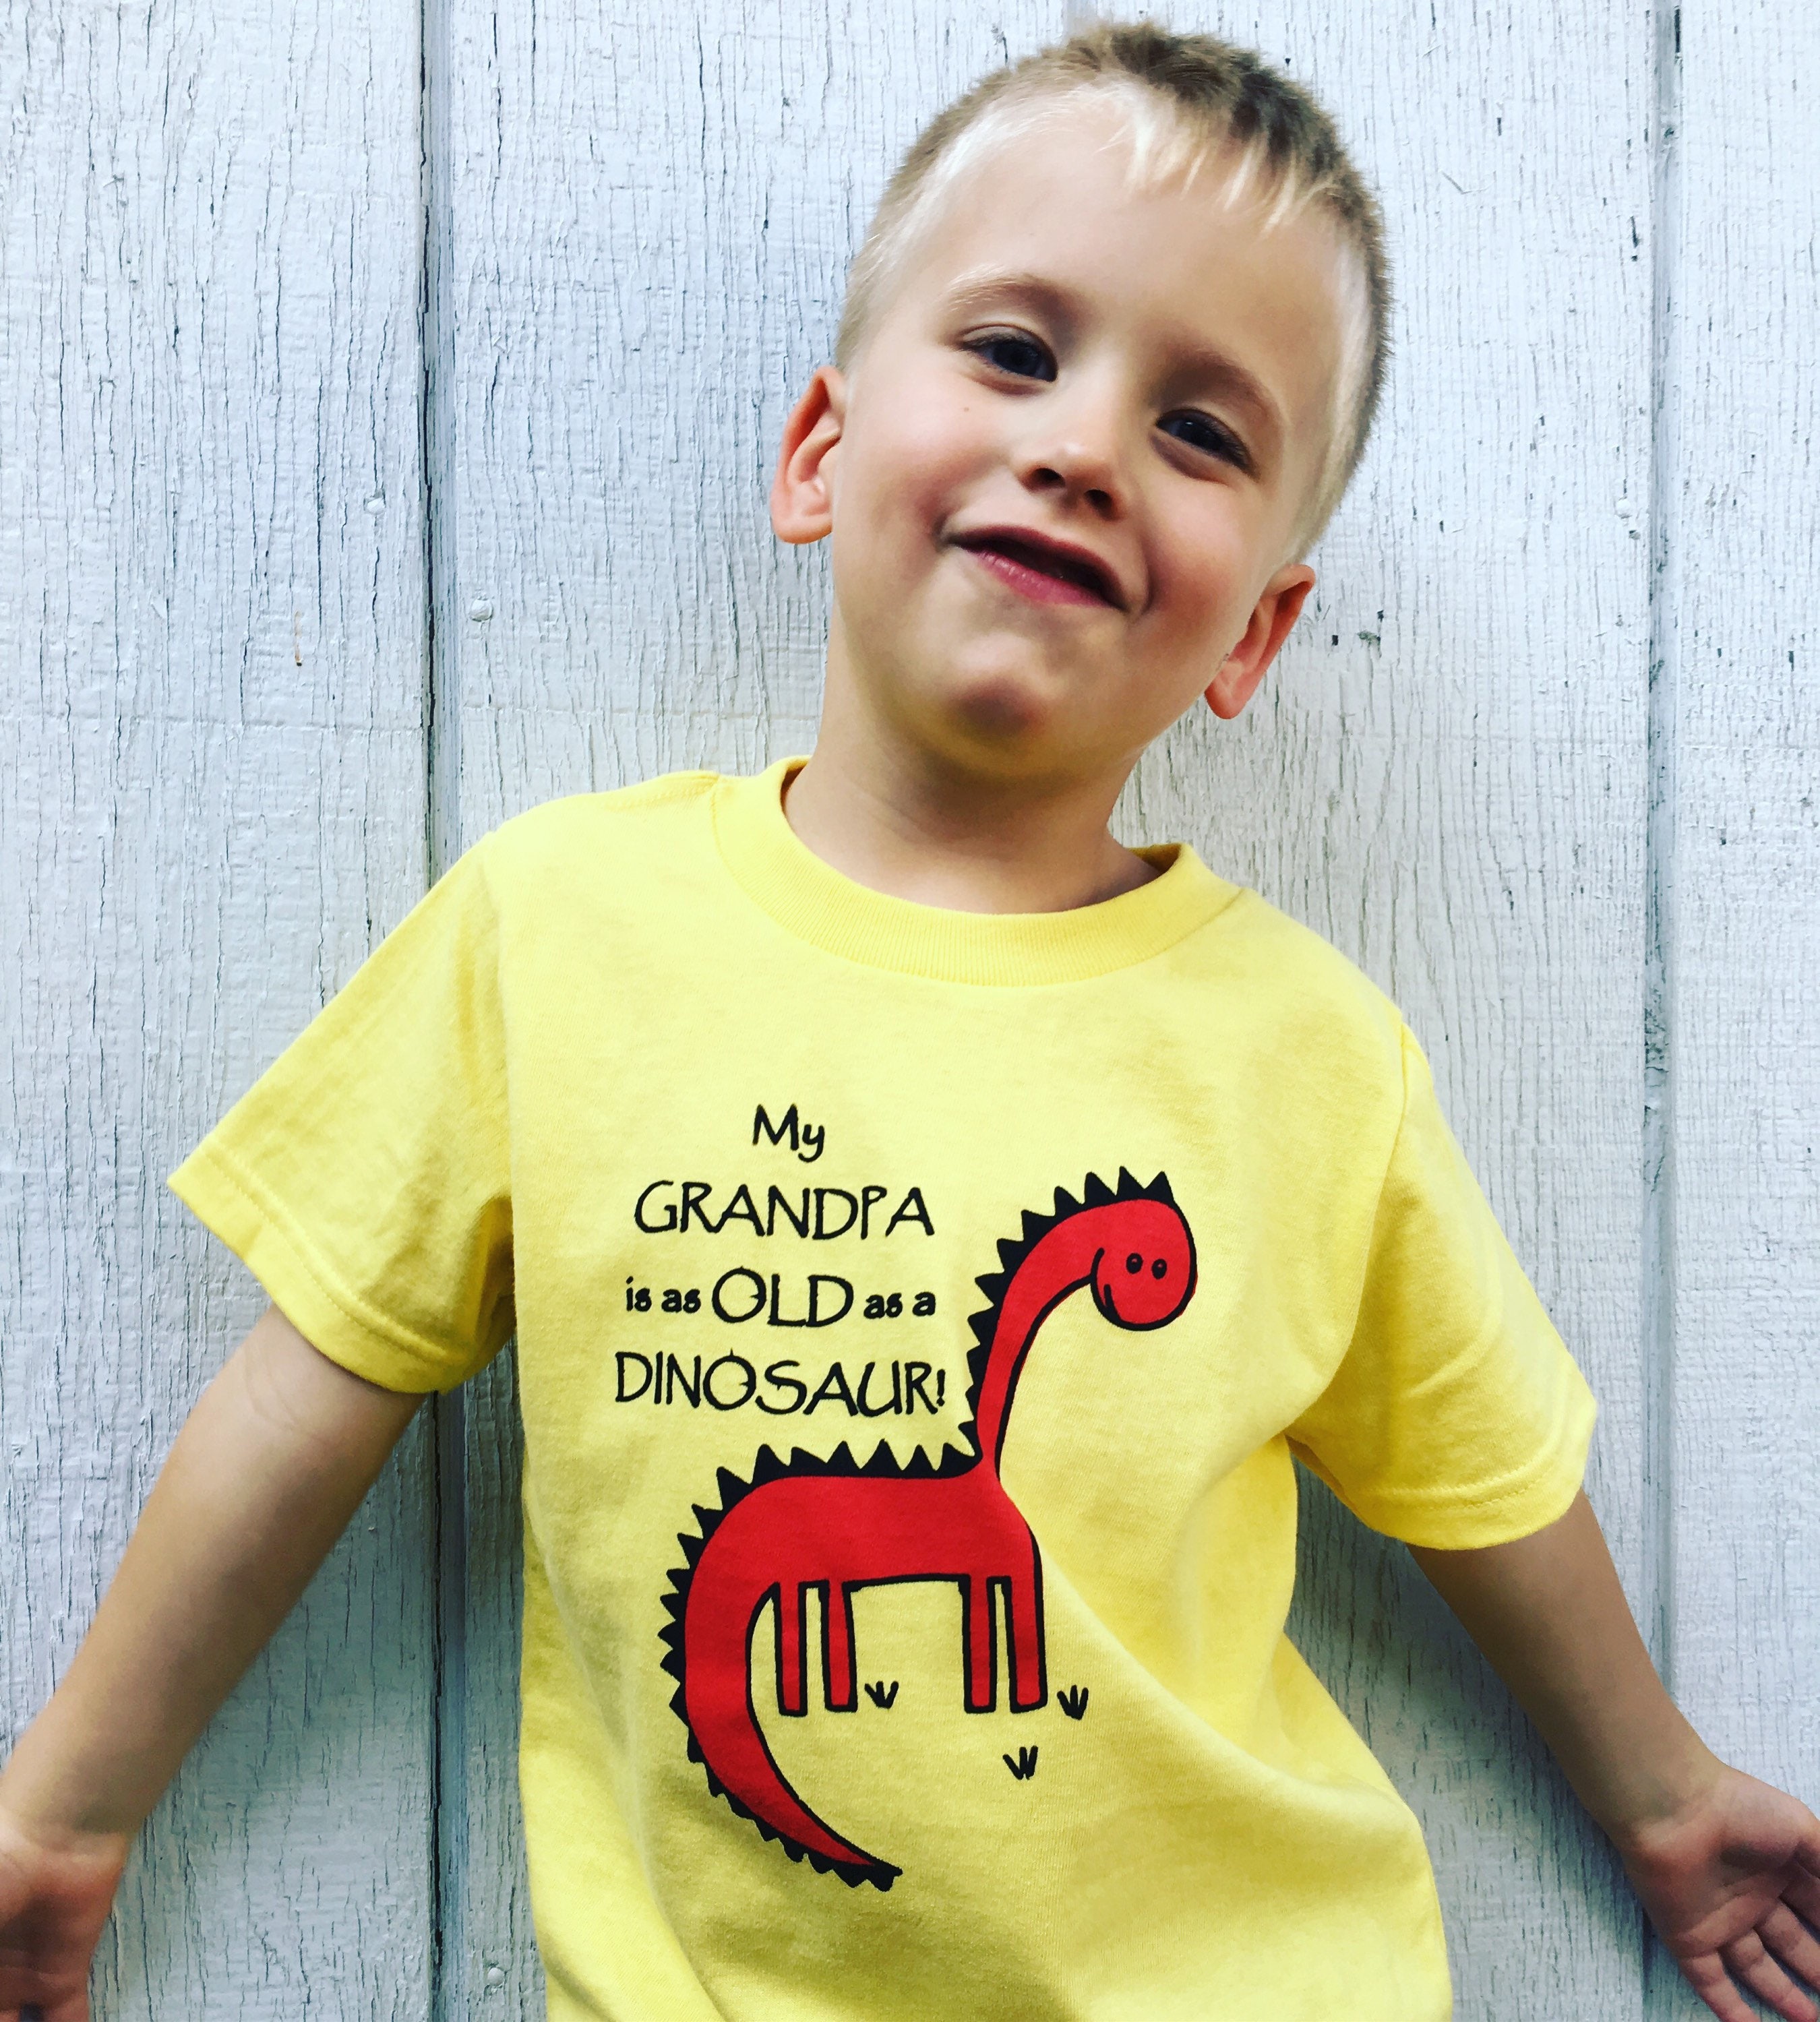 My Grandpa is as Old as a Dinosaur Funny Kids Shirt Toddler | Etsy